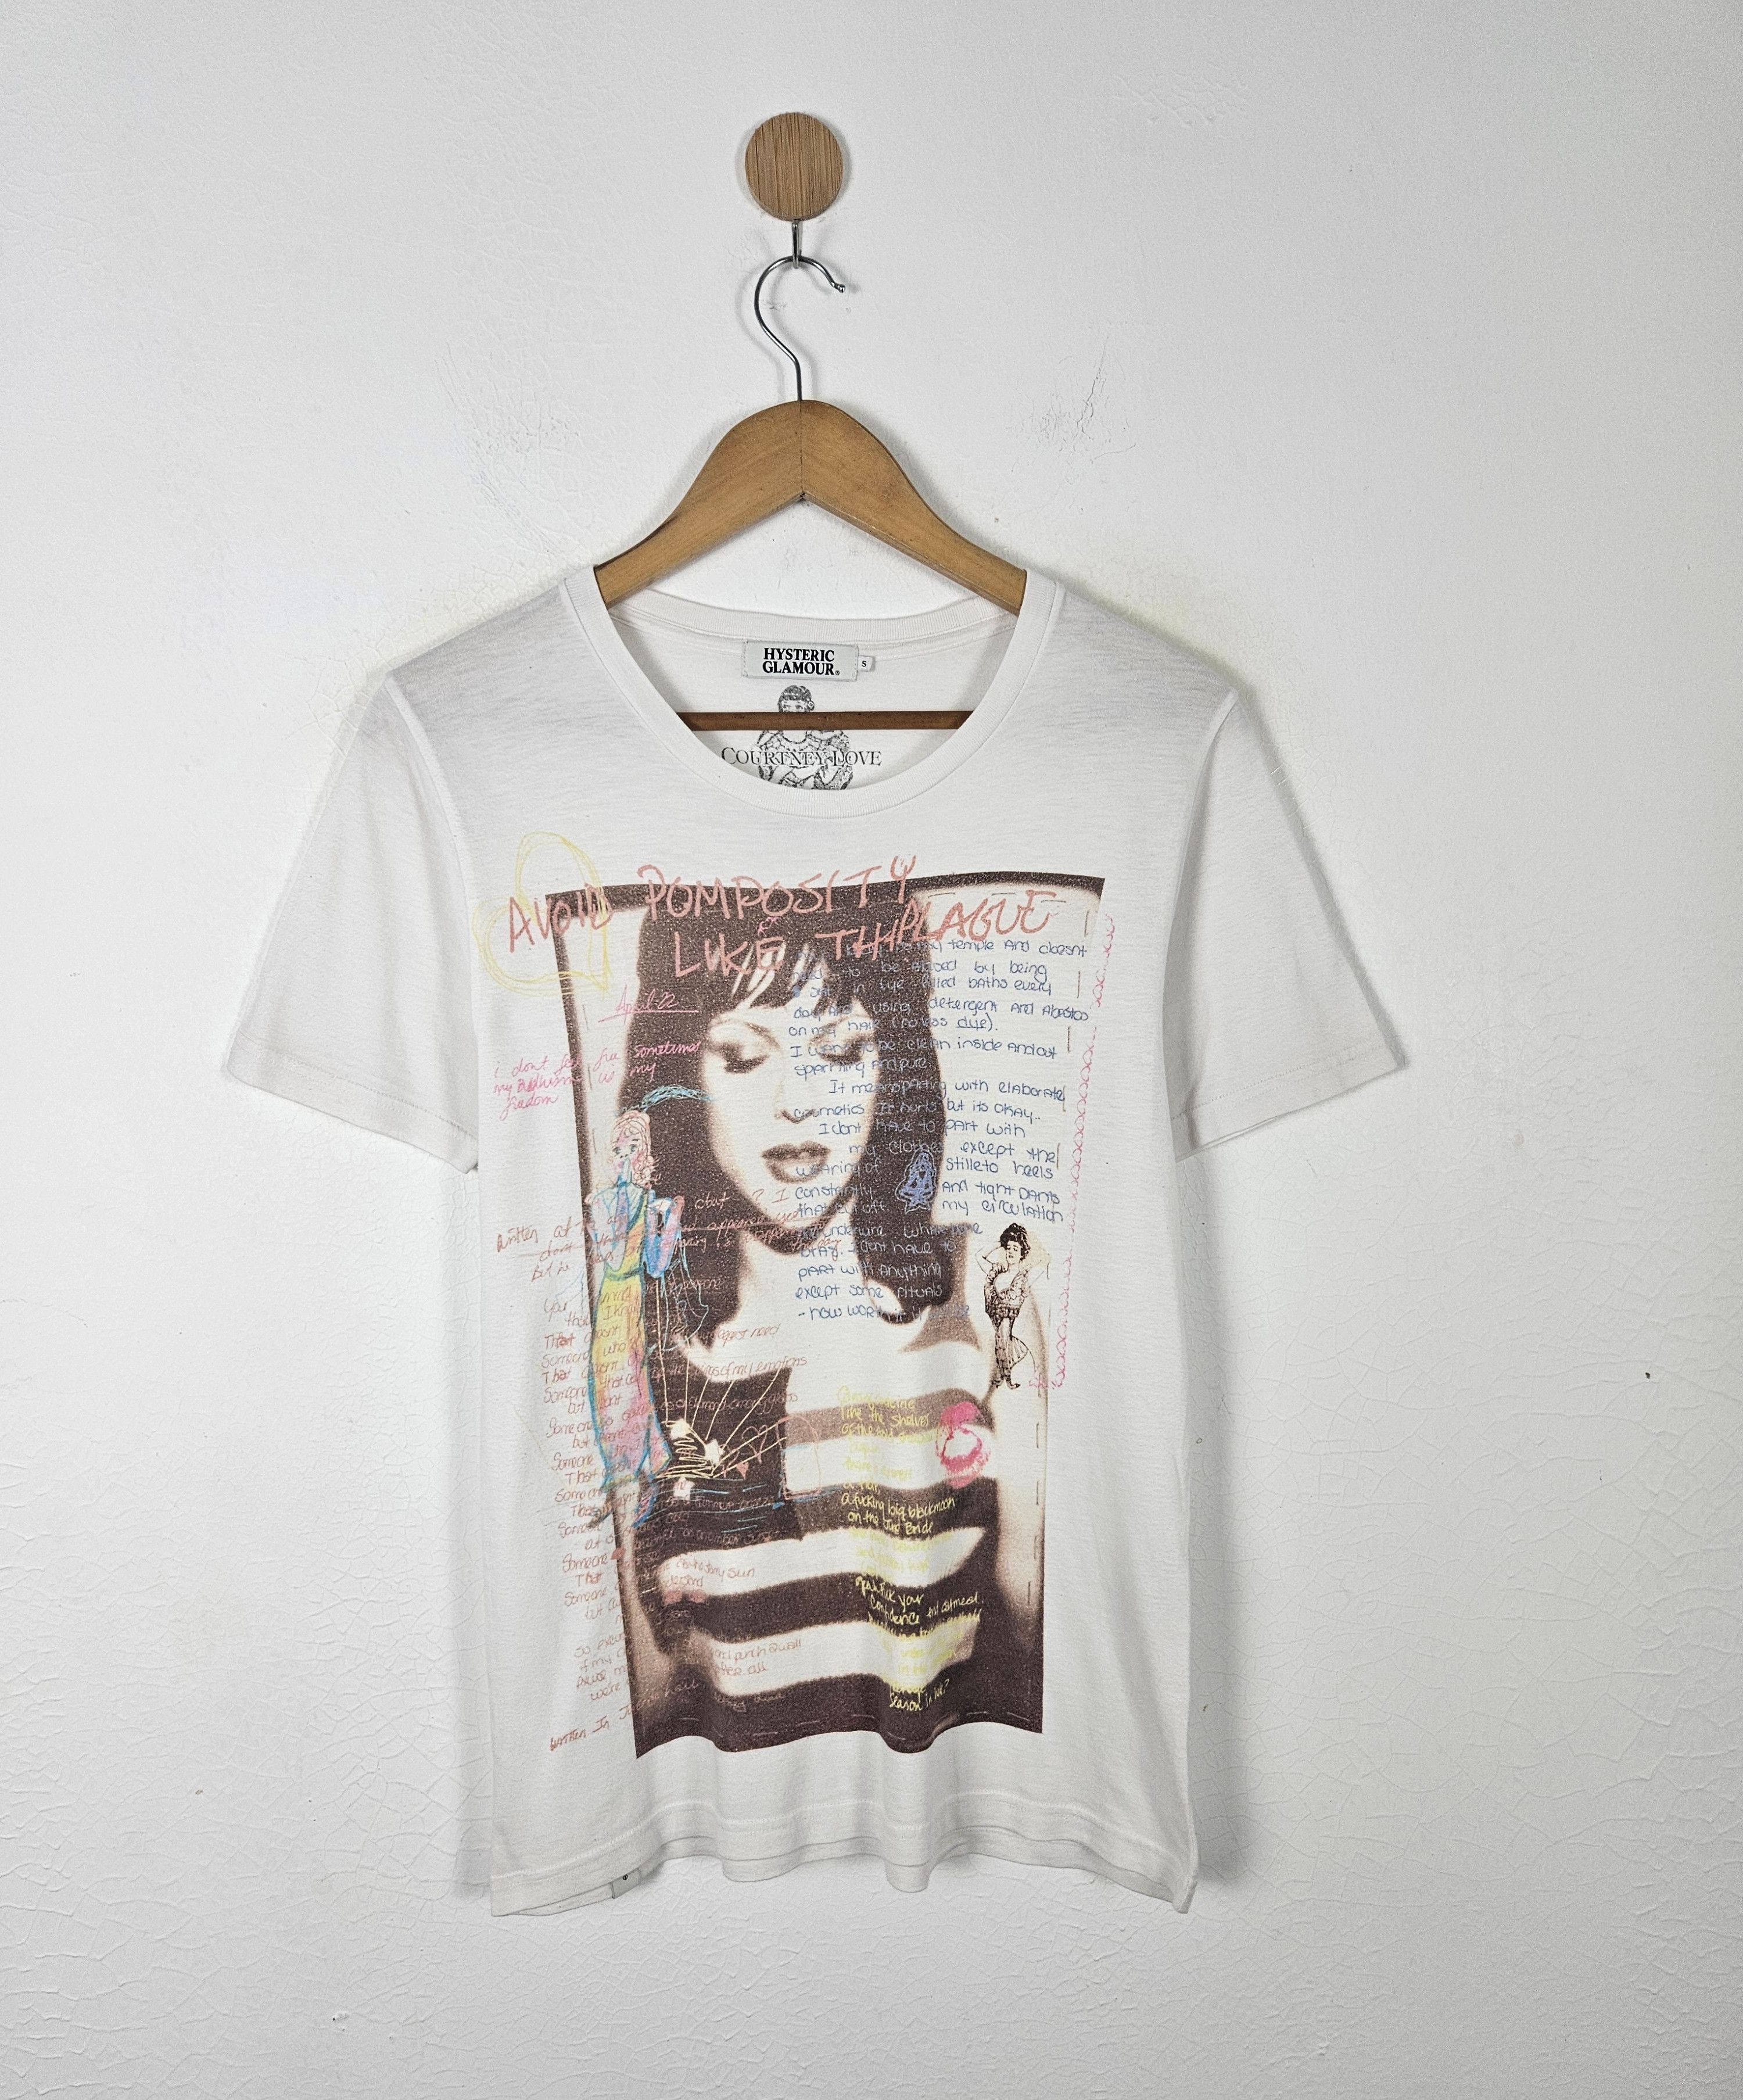 Hysteric Glamour HYSTERIC GLAMOUR COURTNEY LOVE TEE | Grailed